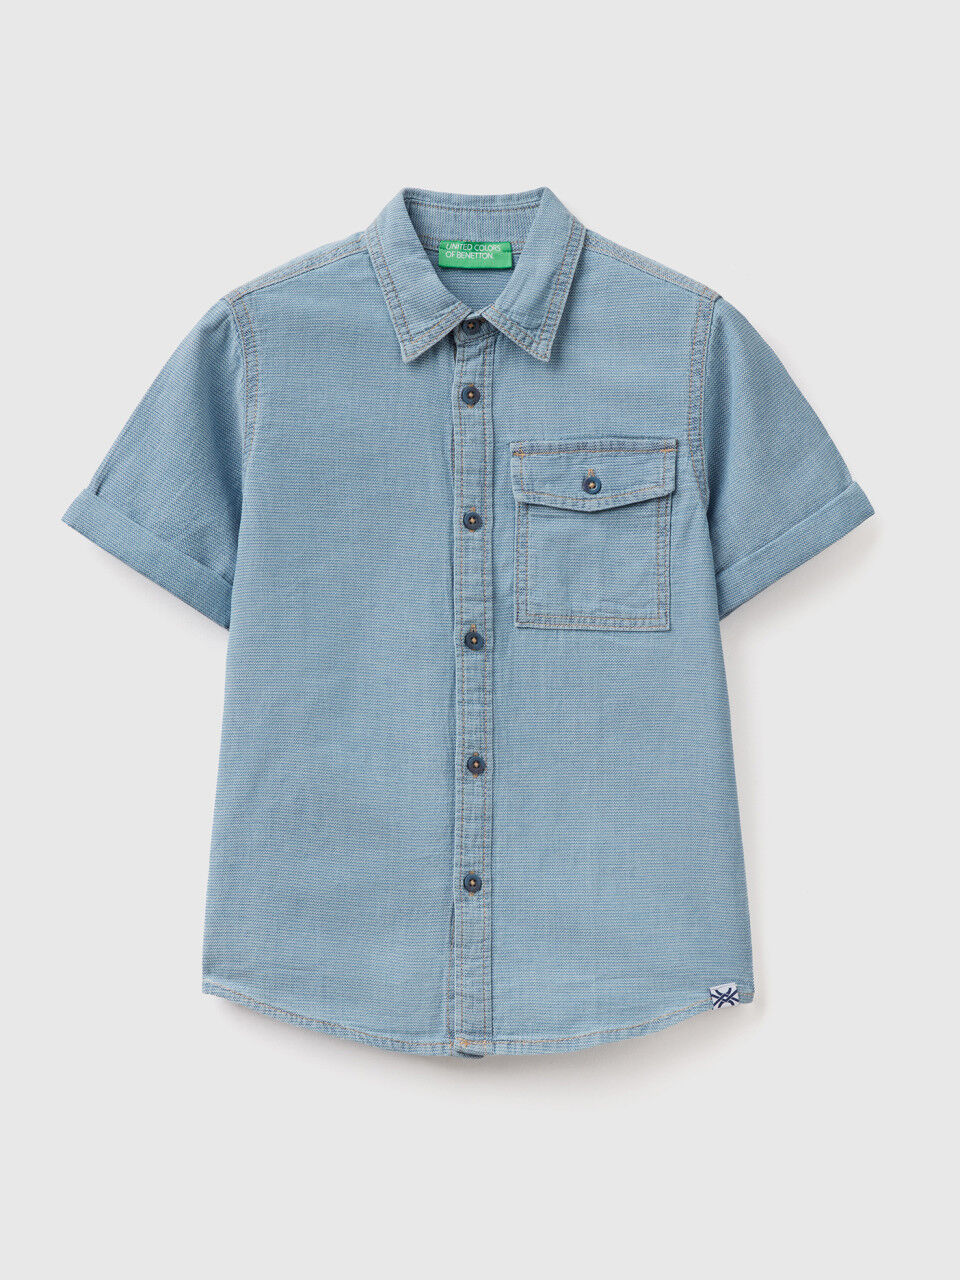 Baby Toddler Boys Summer Outfits:Denim Blue Short Sleeve Shirts+White Short  Pants for 2-7 Years | Wish